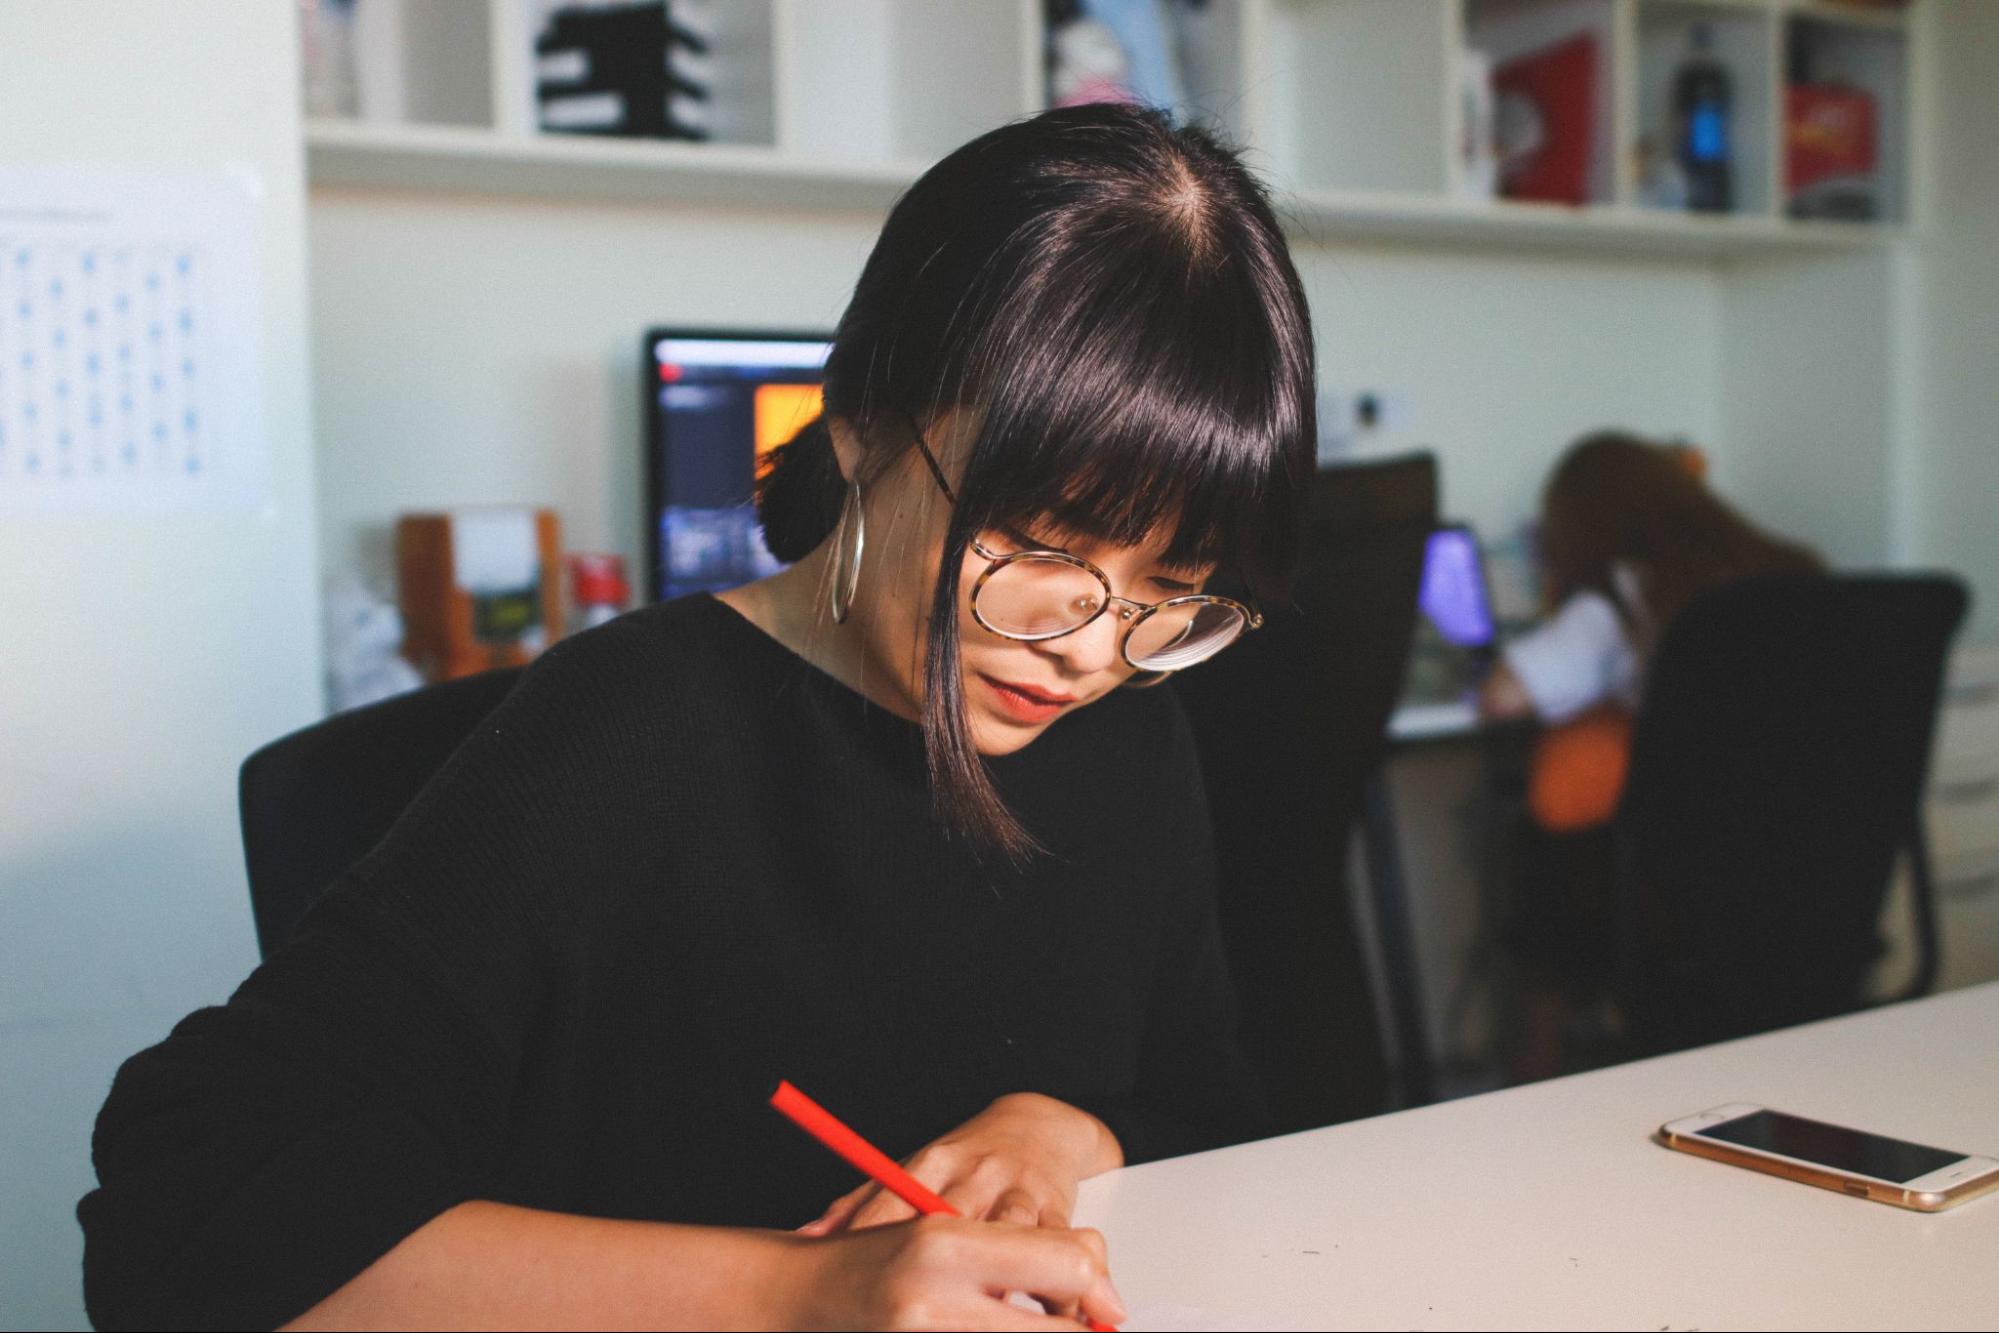 A woman writing with a red pen in an office and wearing hoop earrings